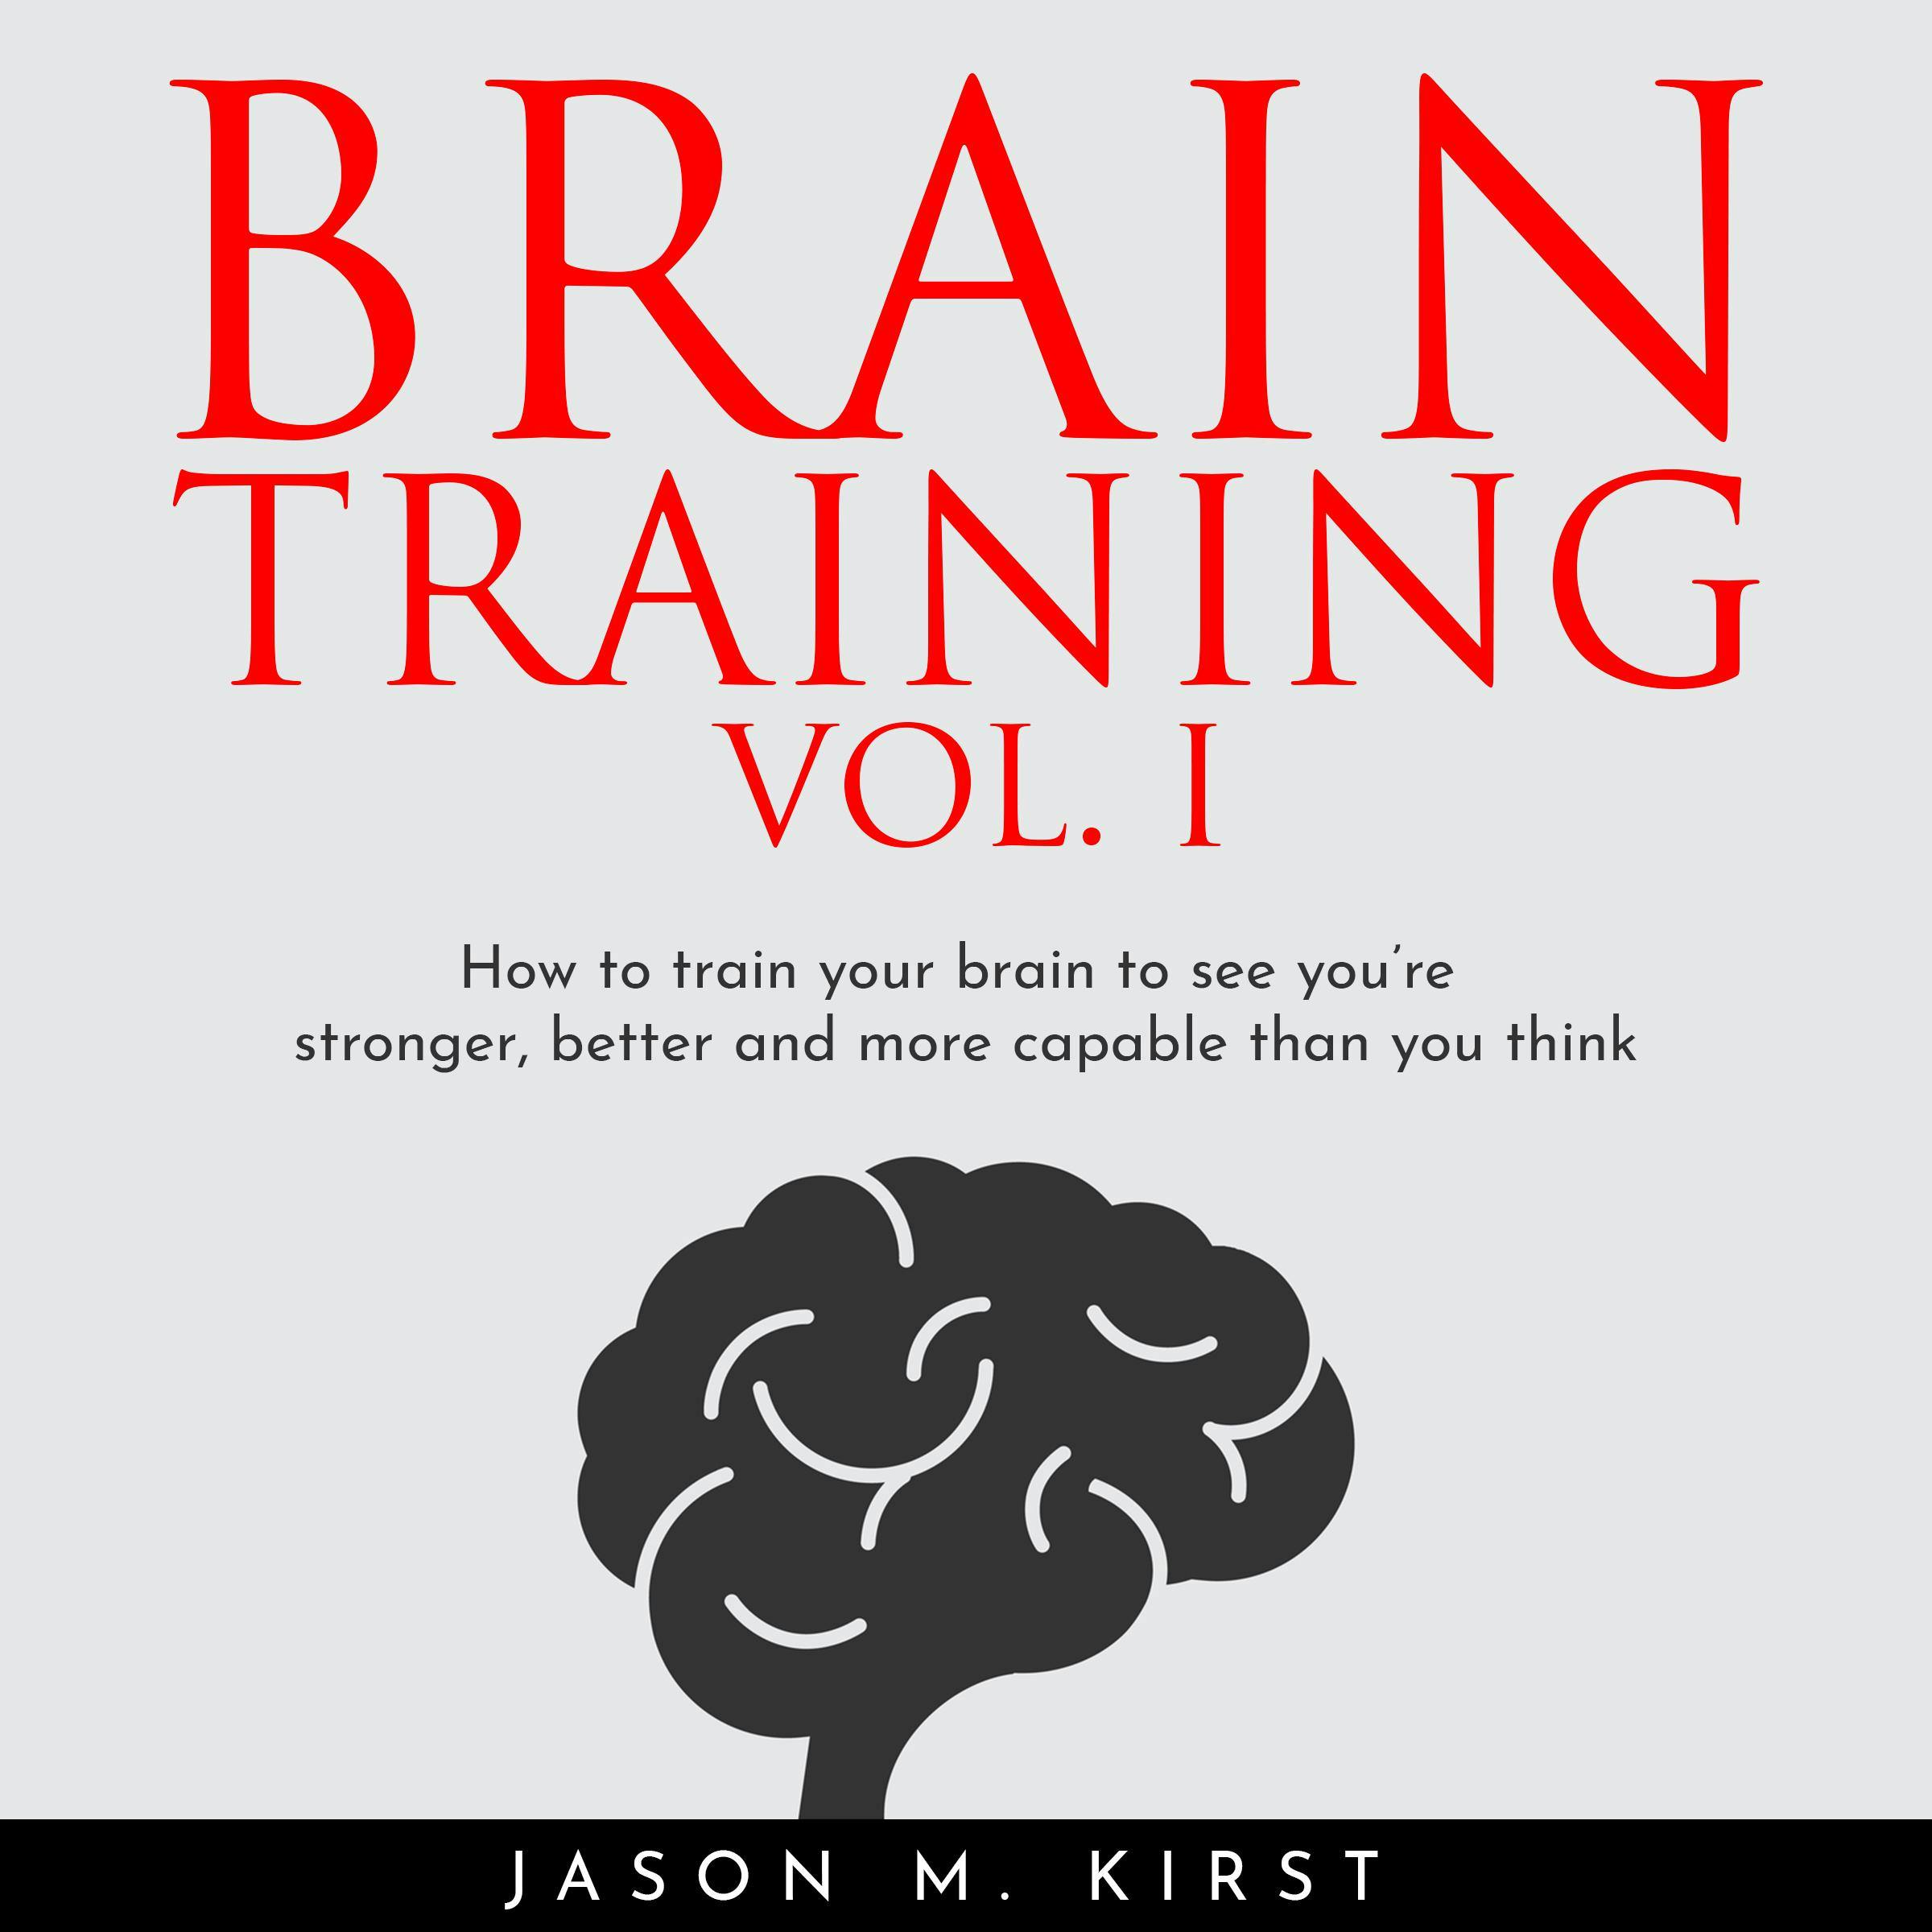 BRAIN TRAINING VOL. I : HOW TO TRAIN YOUR BRAIN TO SEE YOU’RE STRONGER, BETTER AND MORE CAPABLE THAN YOU THINK - Jason M. Kirst